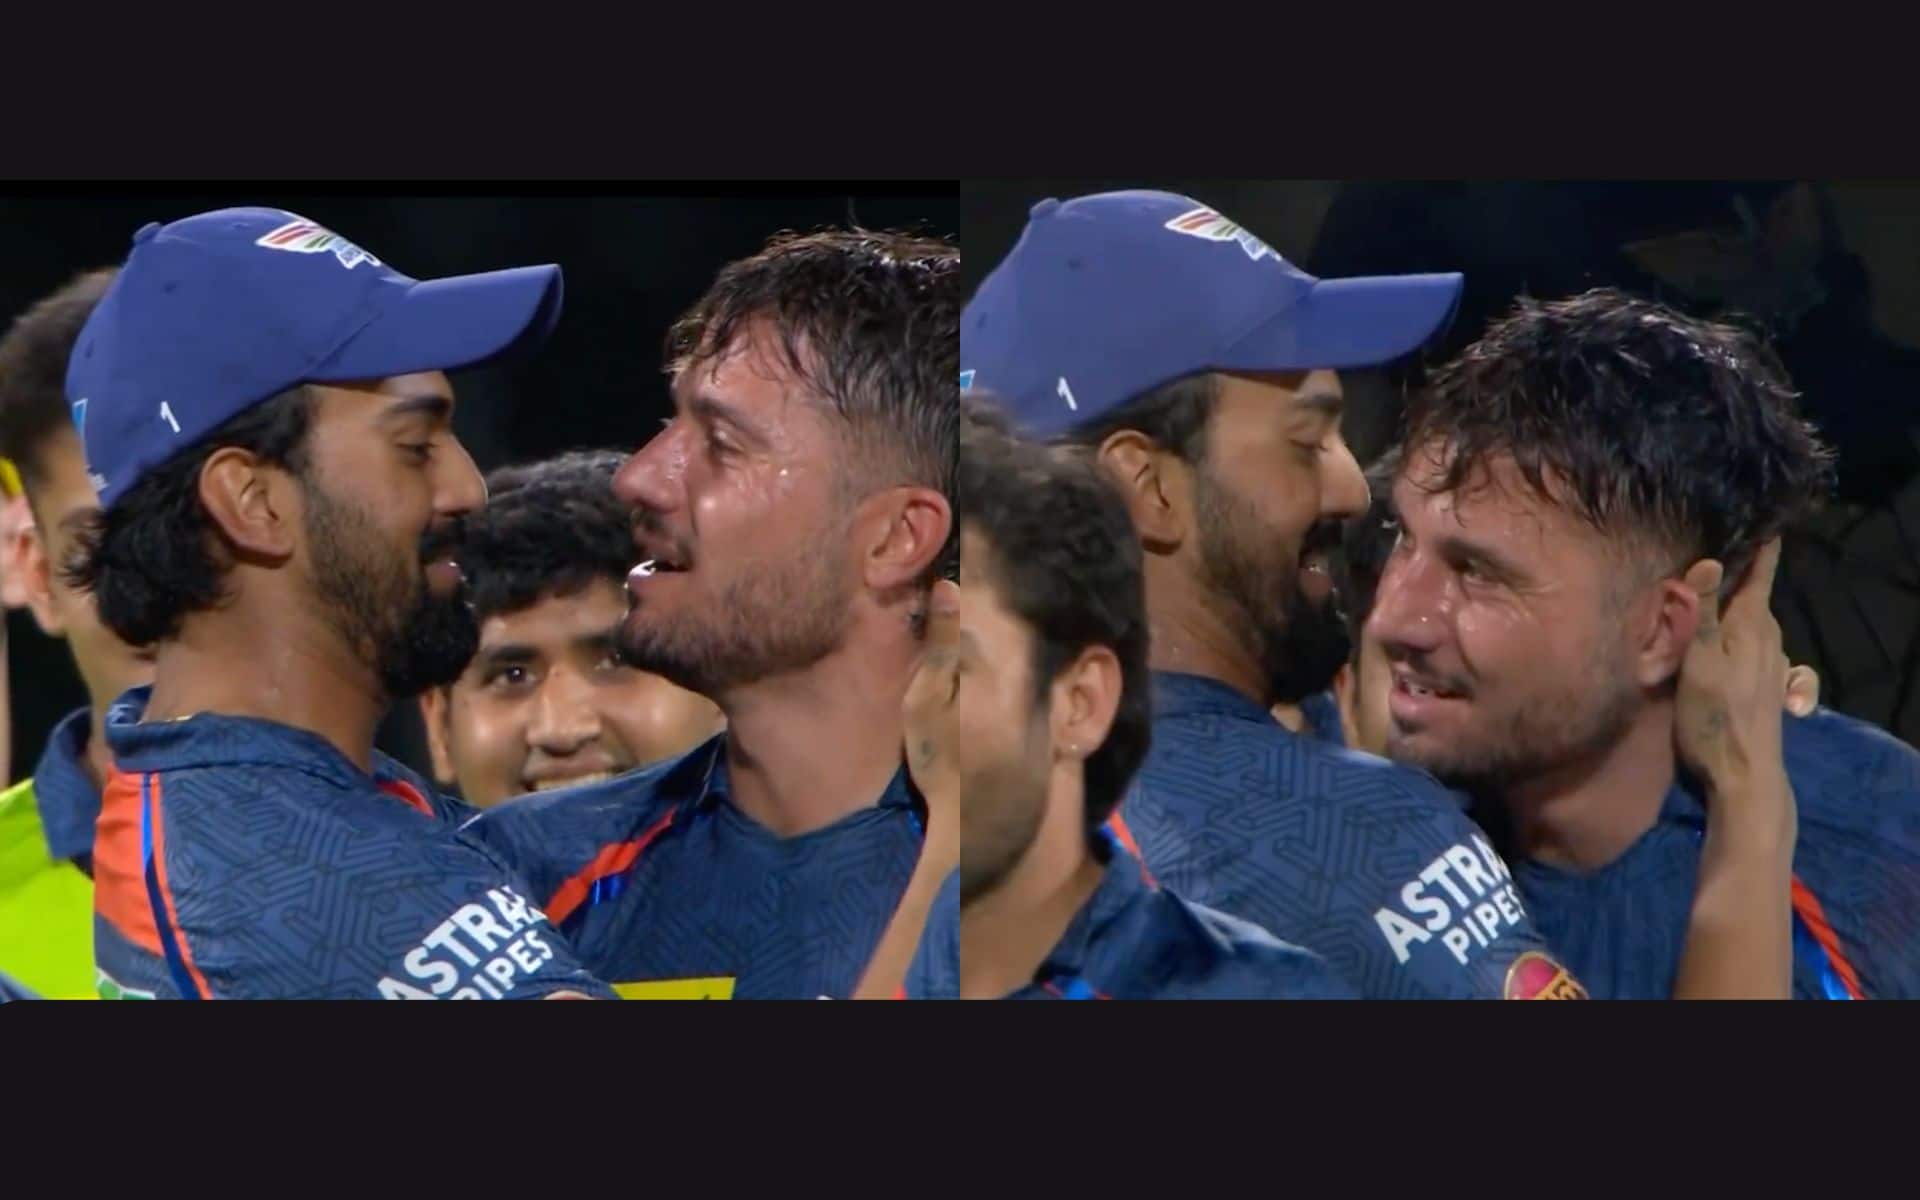 KL Rahul and Marcus Stoinis after breaching Chepauk on Tuesday (X.com)